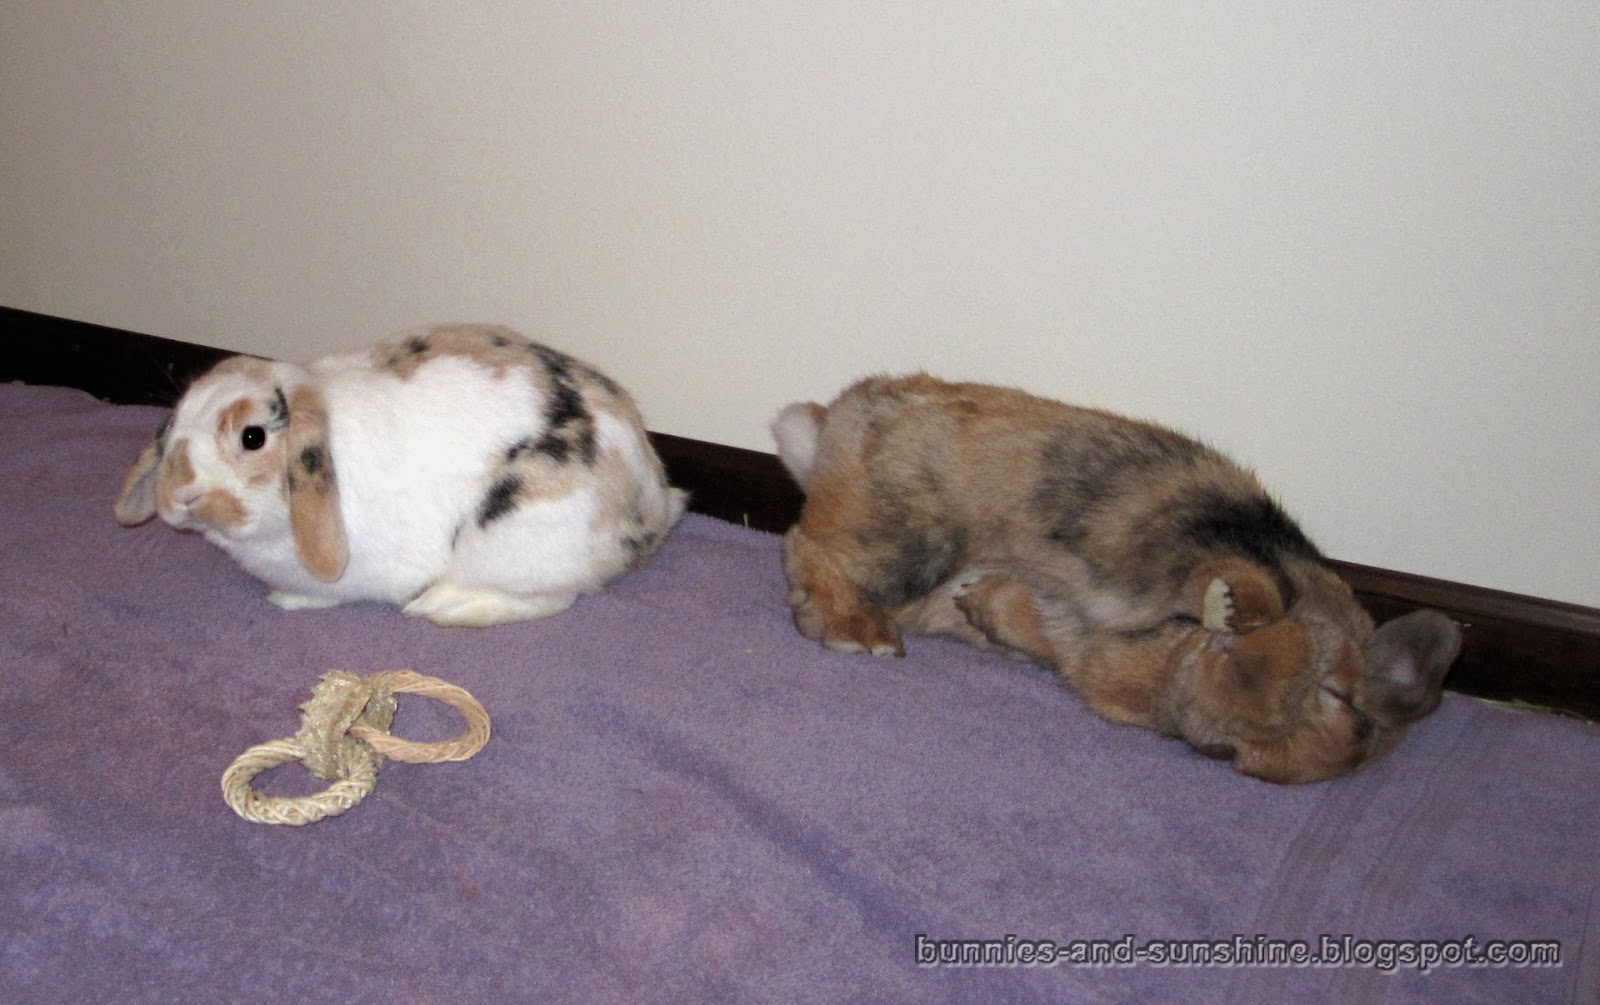 Bunnies and Sunshine: The rules of flopping.